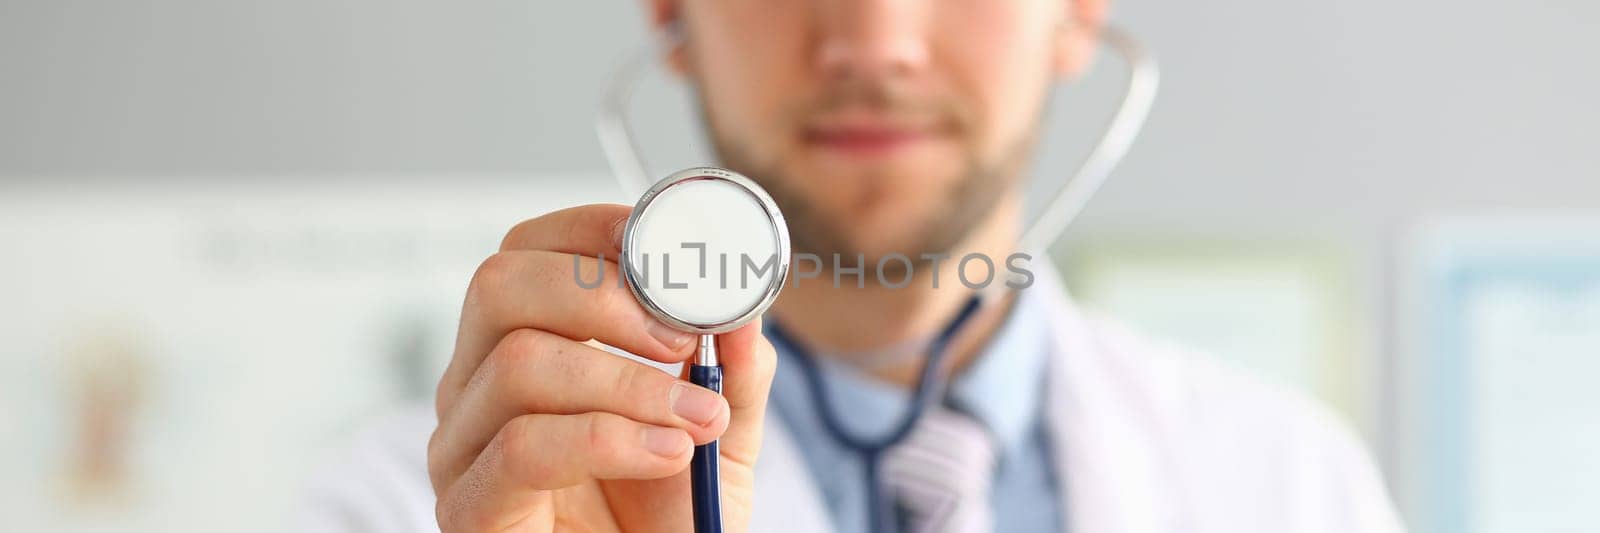 Doctor holds stethoscope in hands and provides medical services. Medical insurance and treatment of cardiac diseases